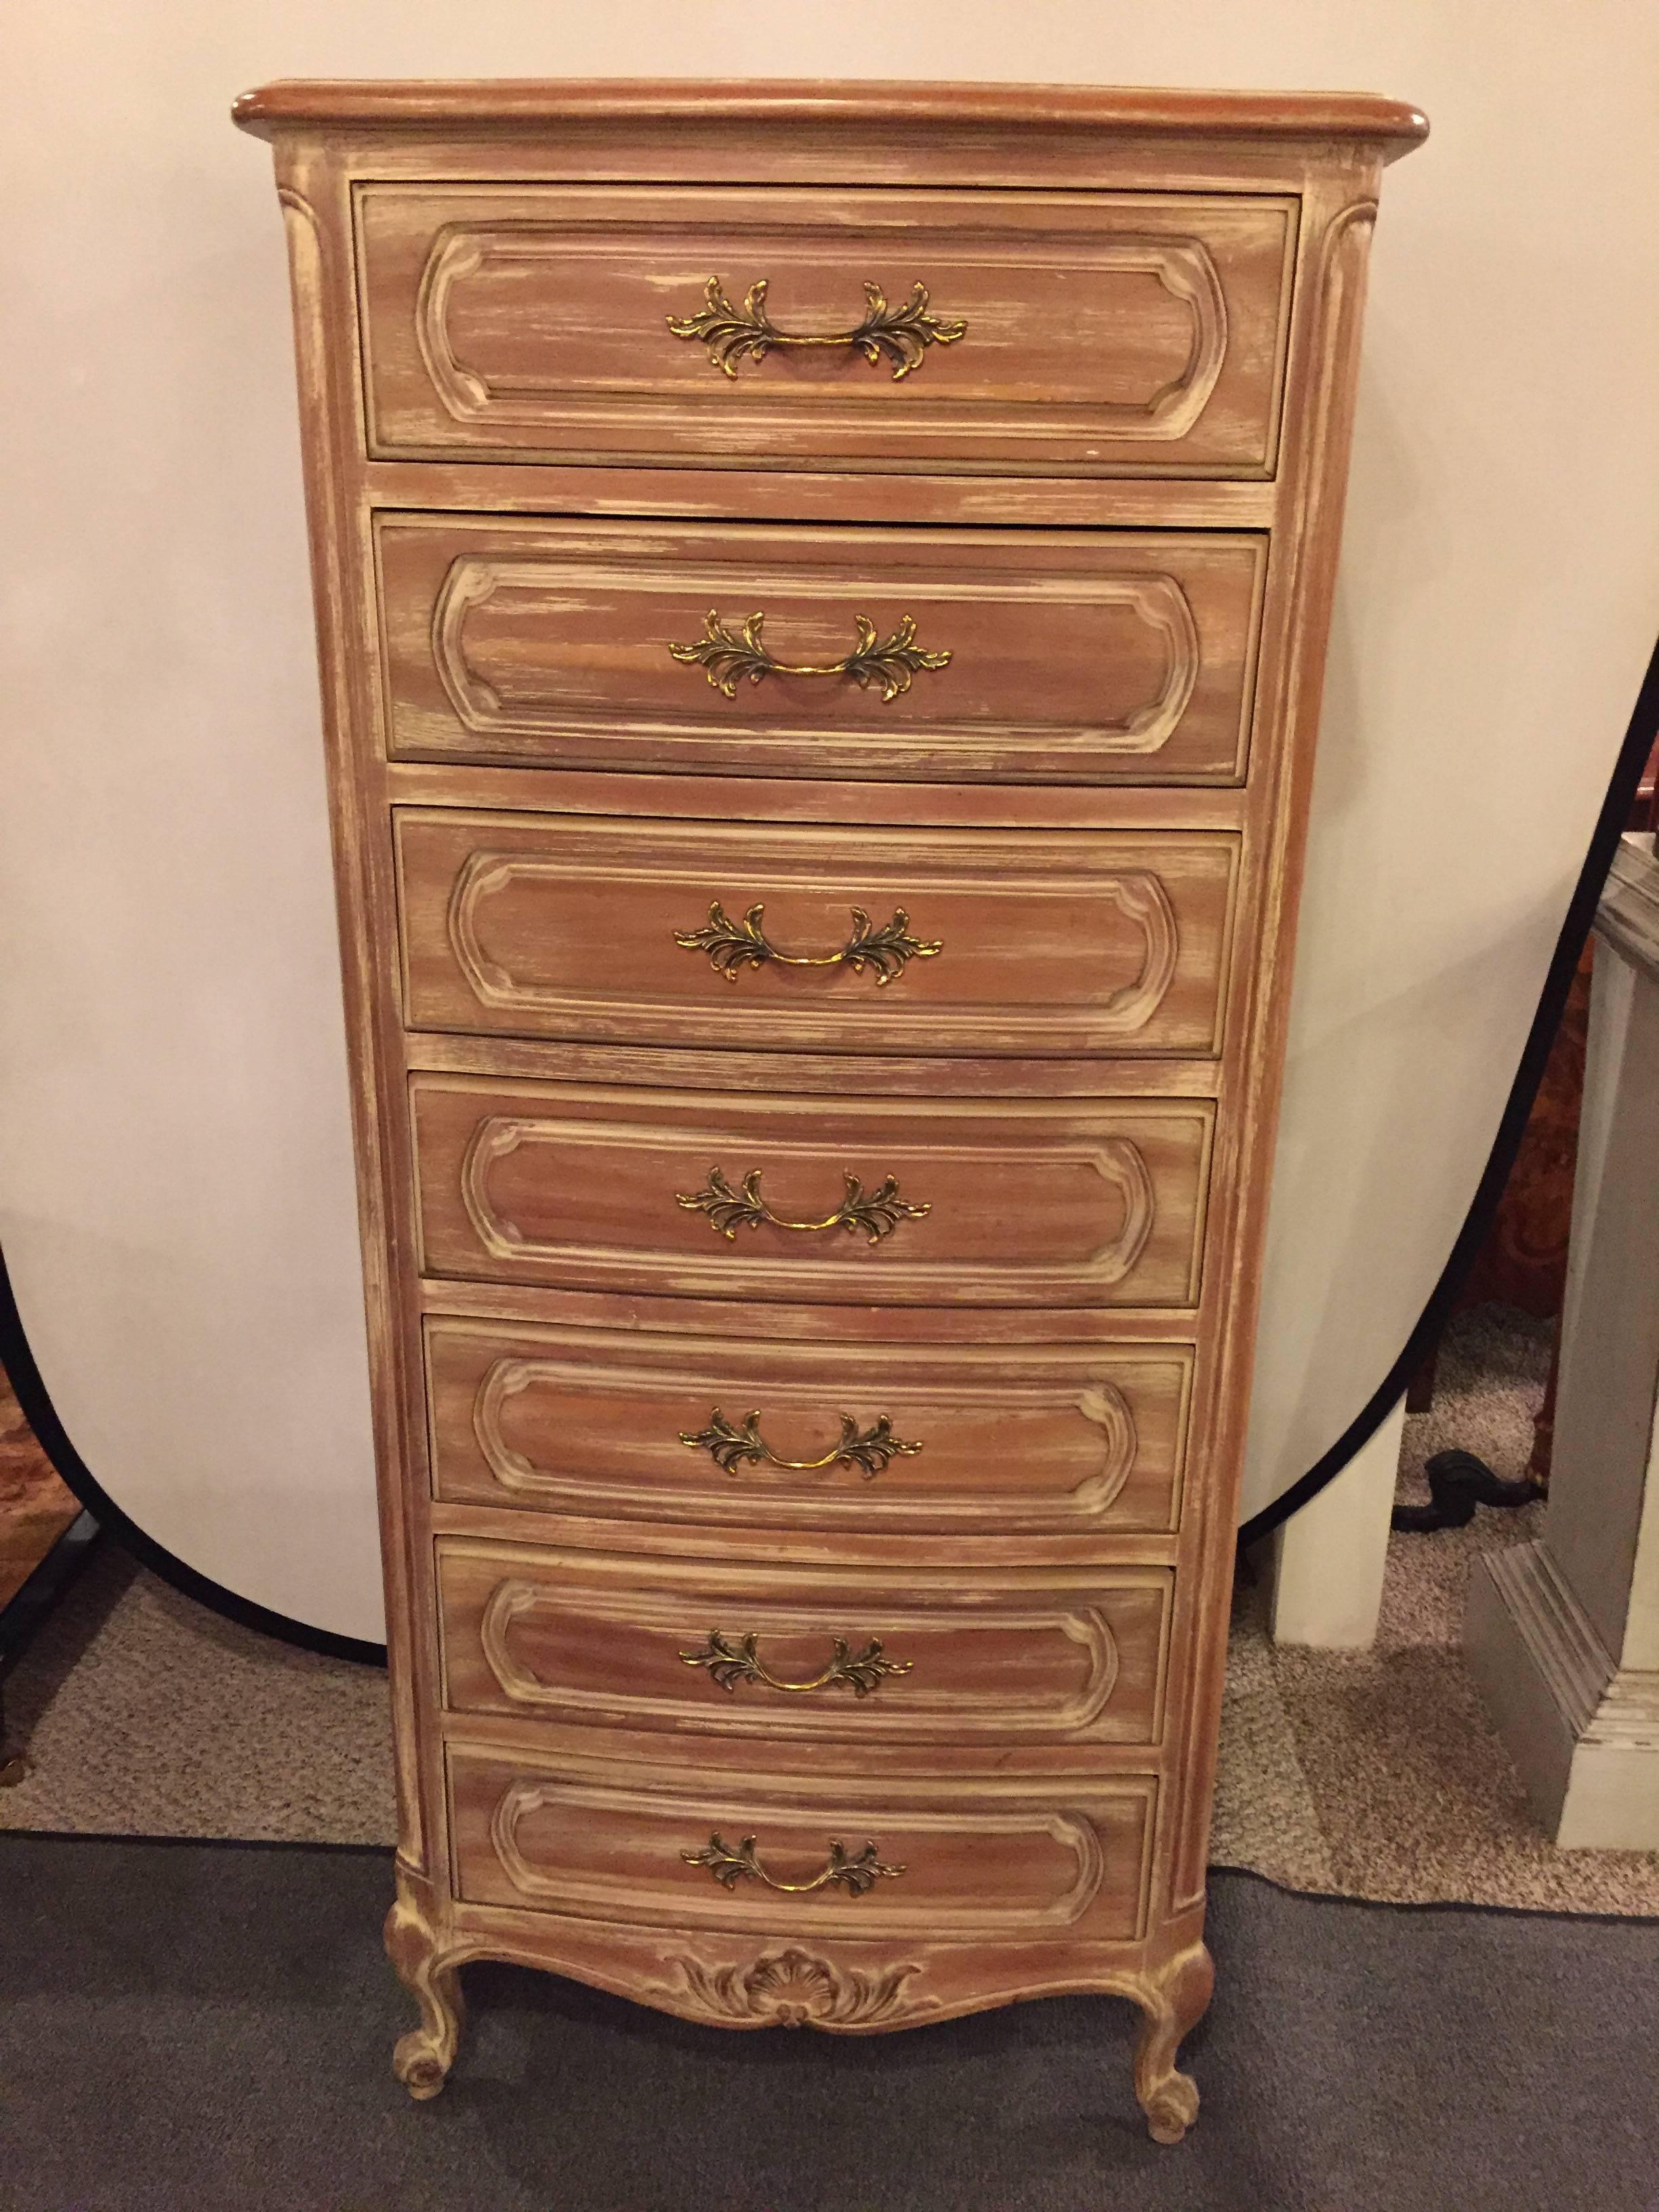 Distress painted Louis XV Style Llingerie chest. Having seven drawers with brass pulls stands this tall and sleek Hollywood Regency style lingerie chest by century. The overall chest in a distressed pickle finish.